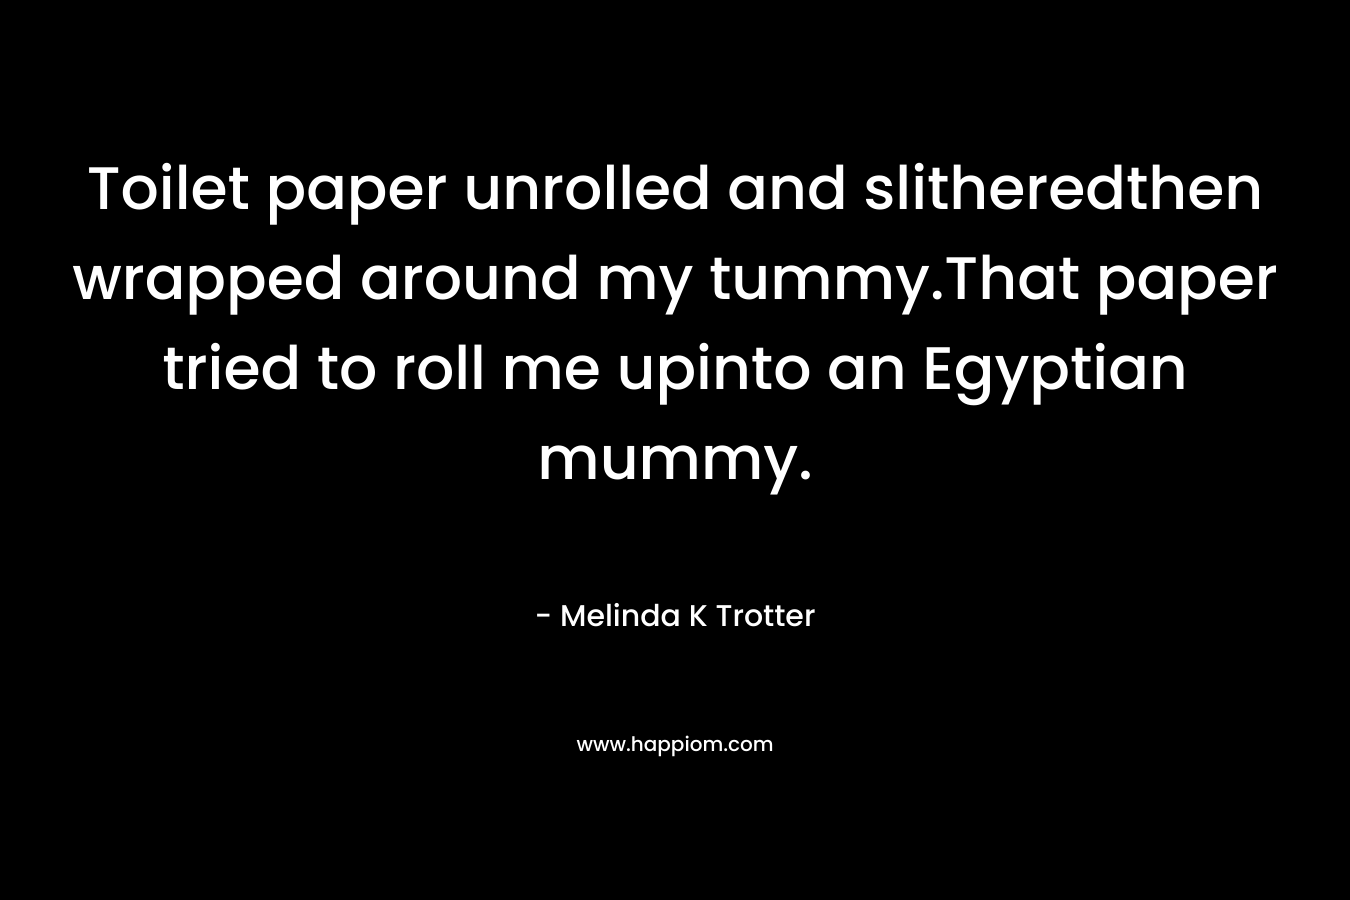 Toilet paper unrolled and slitheredthen wrapped around my tummy.That paper tried to roll me upinto an Egyptian mummy.